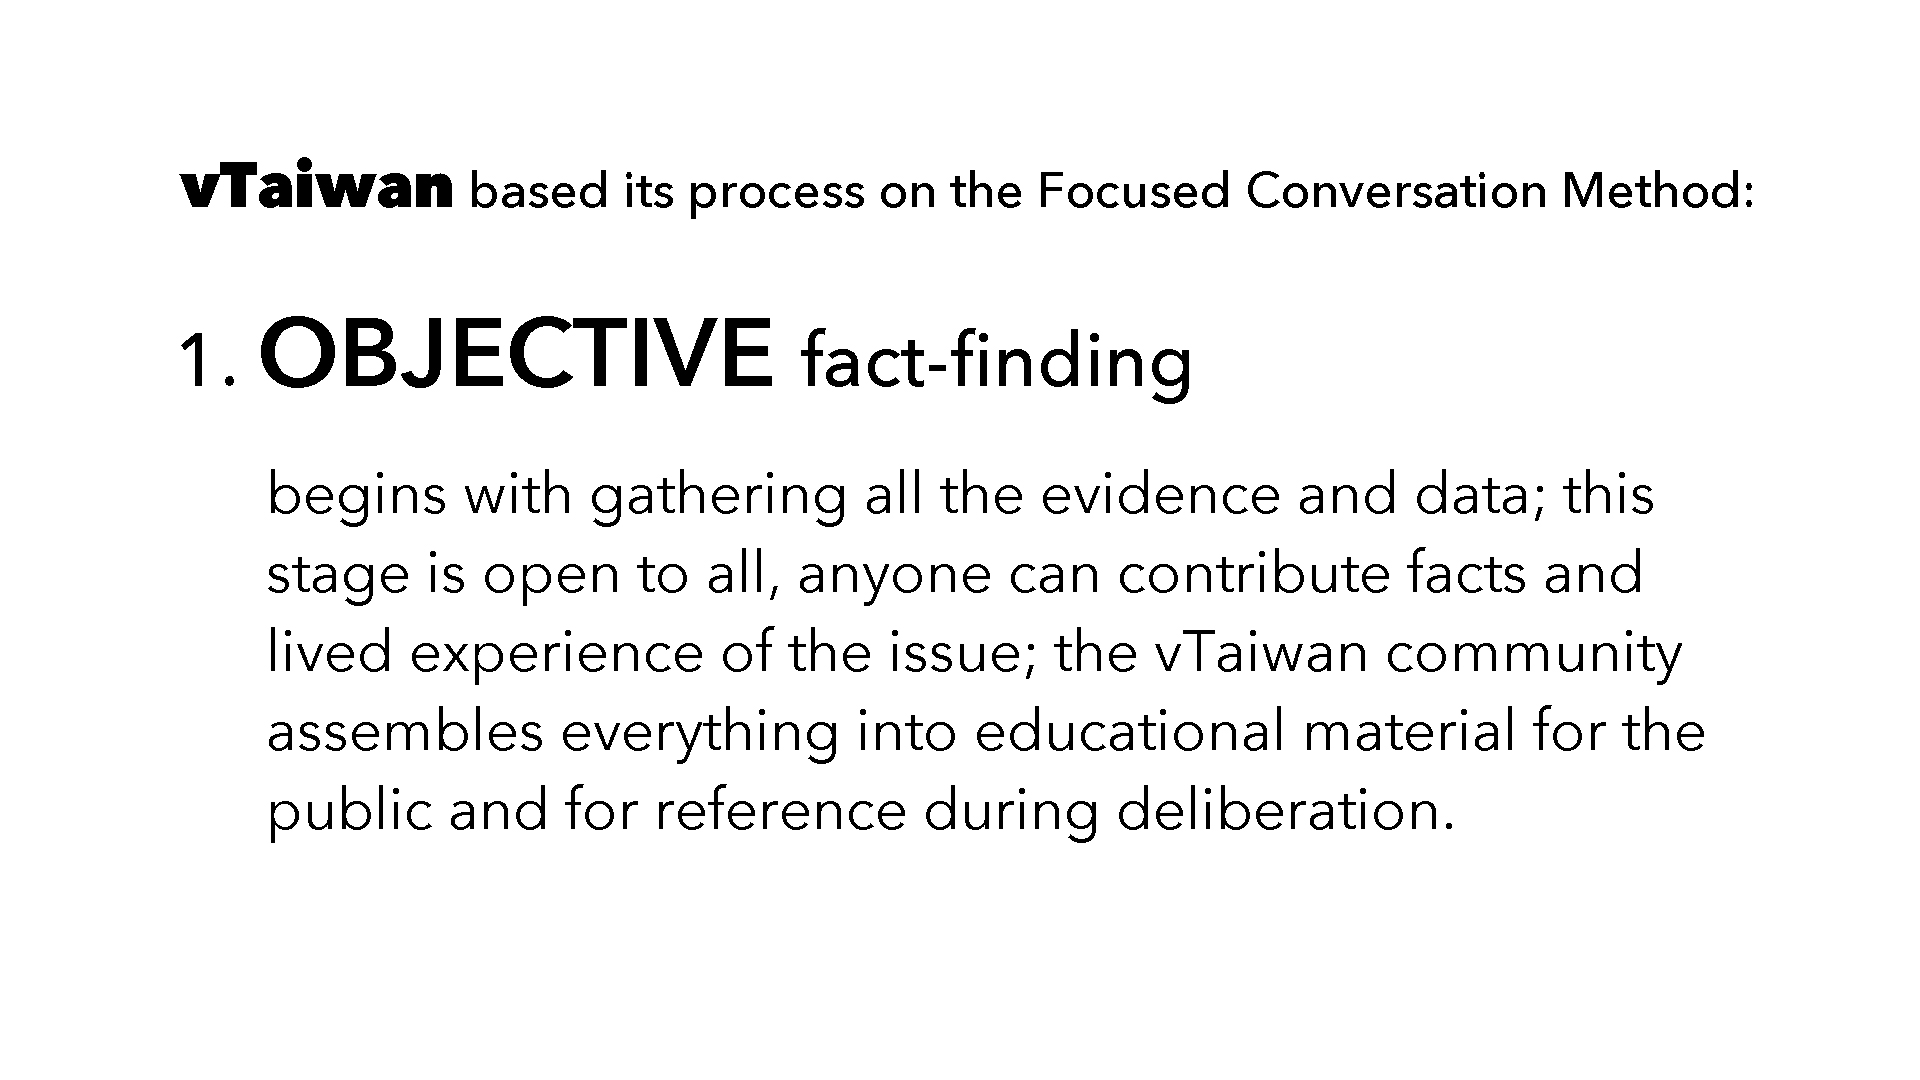 Objective fact-finding